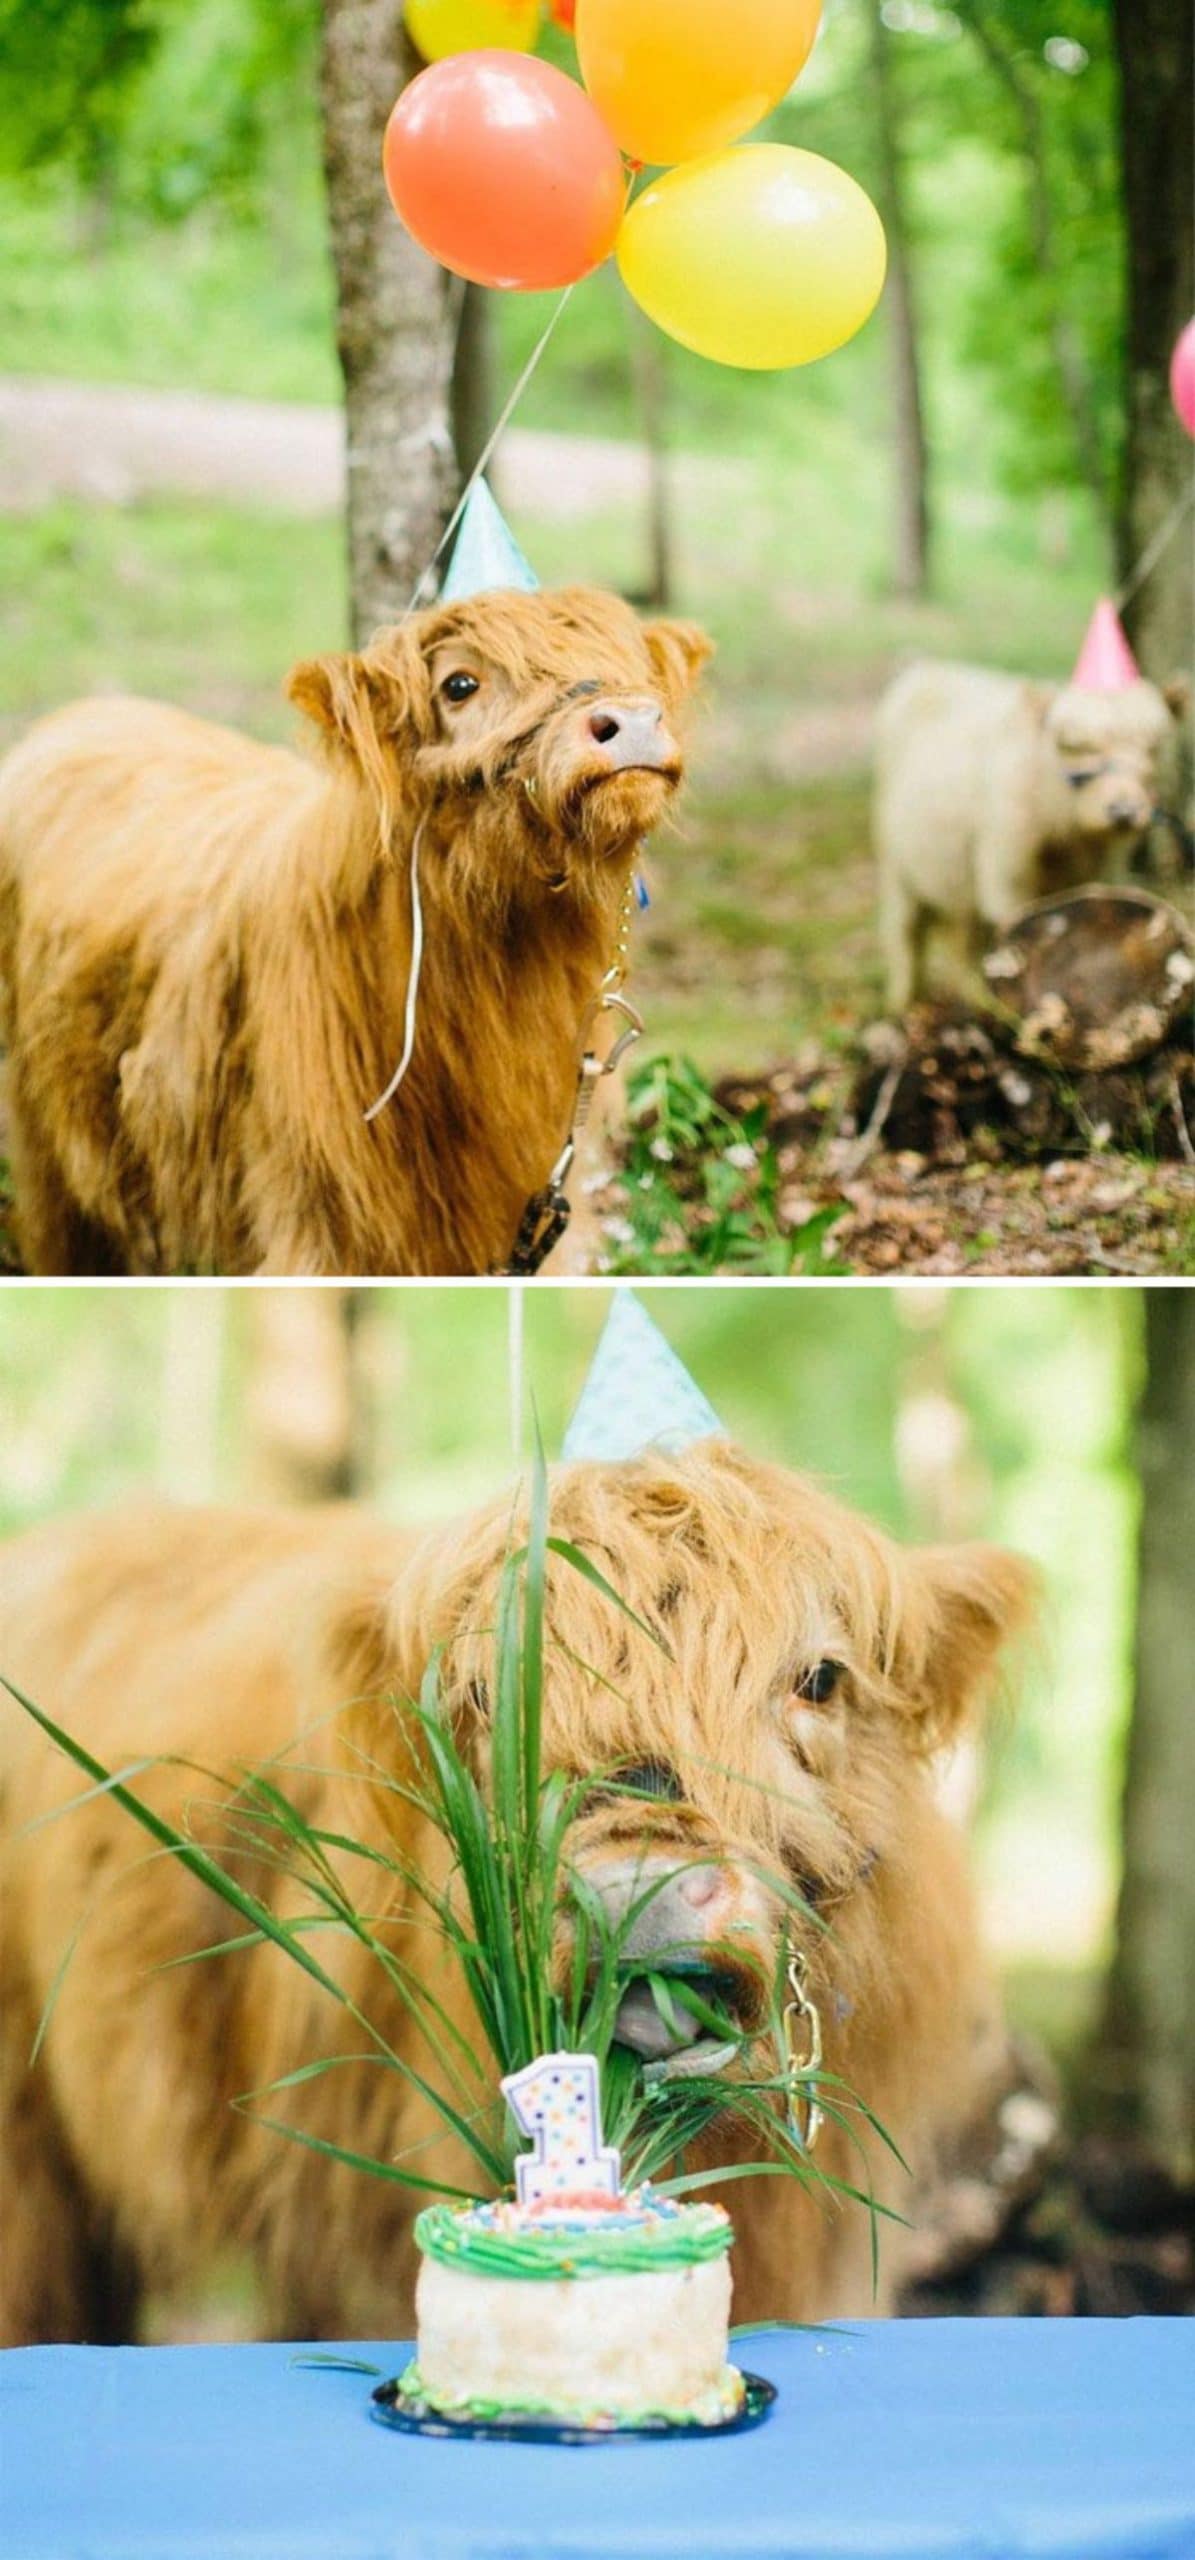 2 photos of a brown calf wearing a blue birthday hat wearing 2 orange and yellow balloons and standing in front of a small cake with a 1 candle on the top with some grass